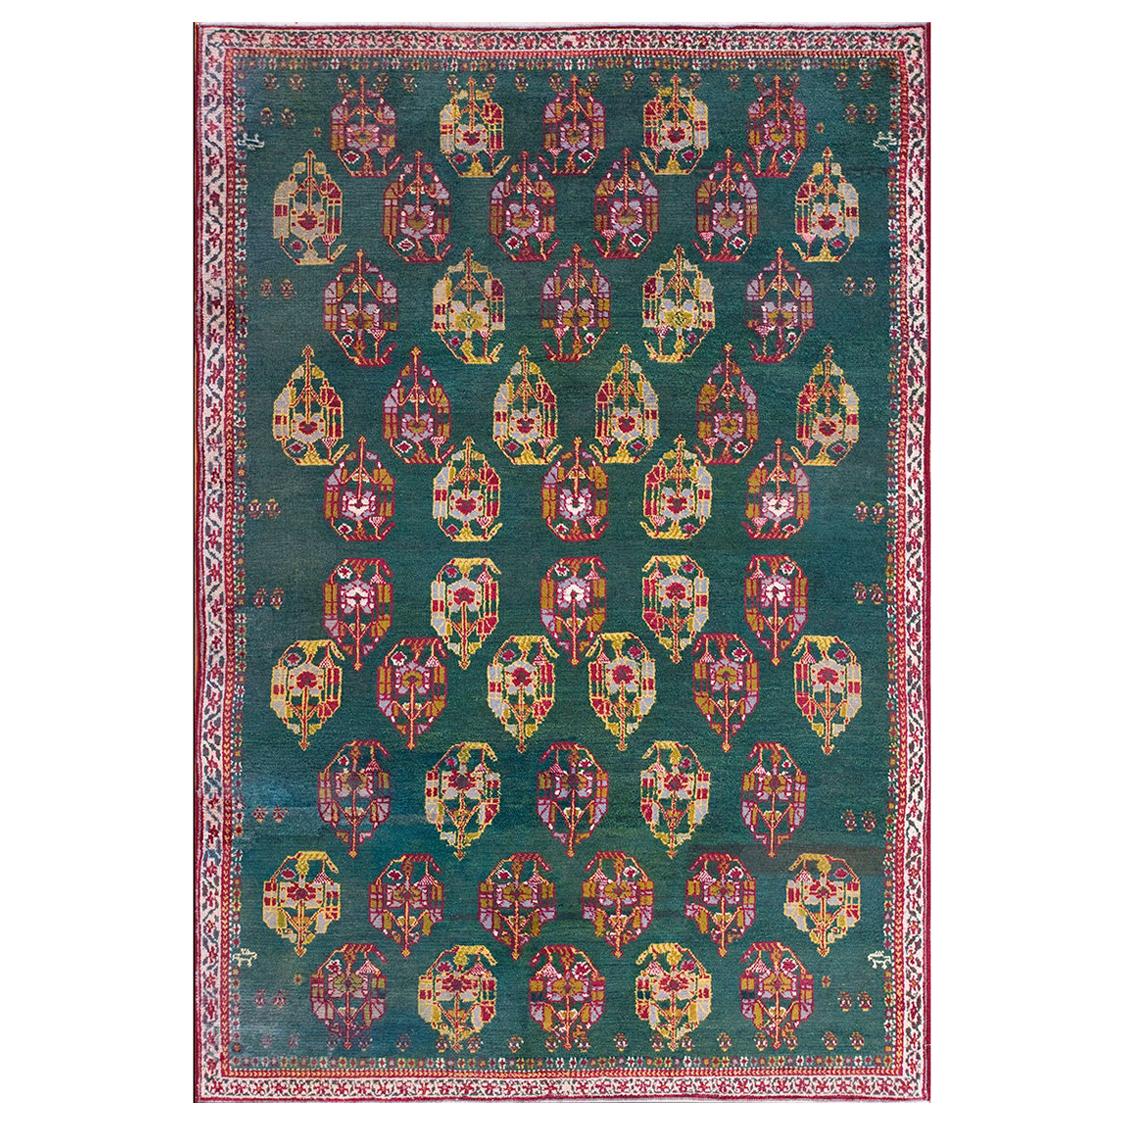 Early 20th Century N. Indian Agra Carpet ( 5'10" x 8'6" - 178 x 260 ) For Sale